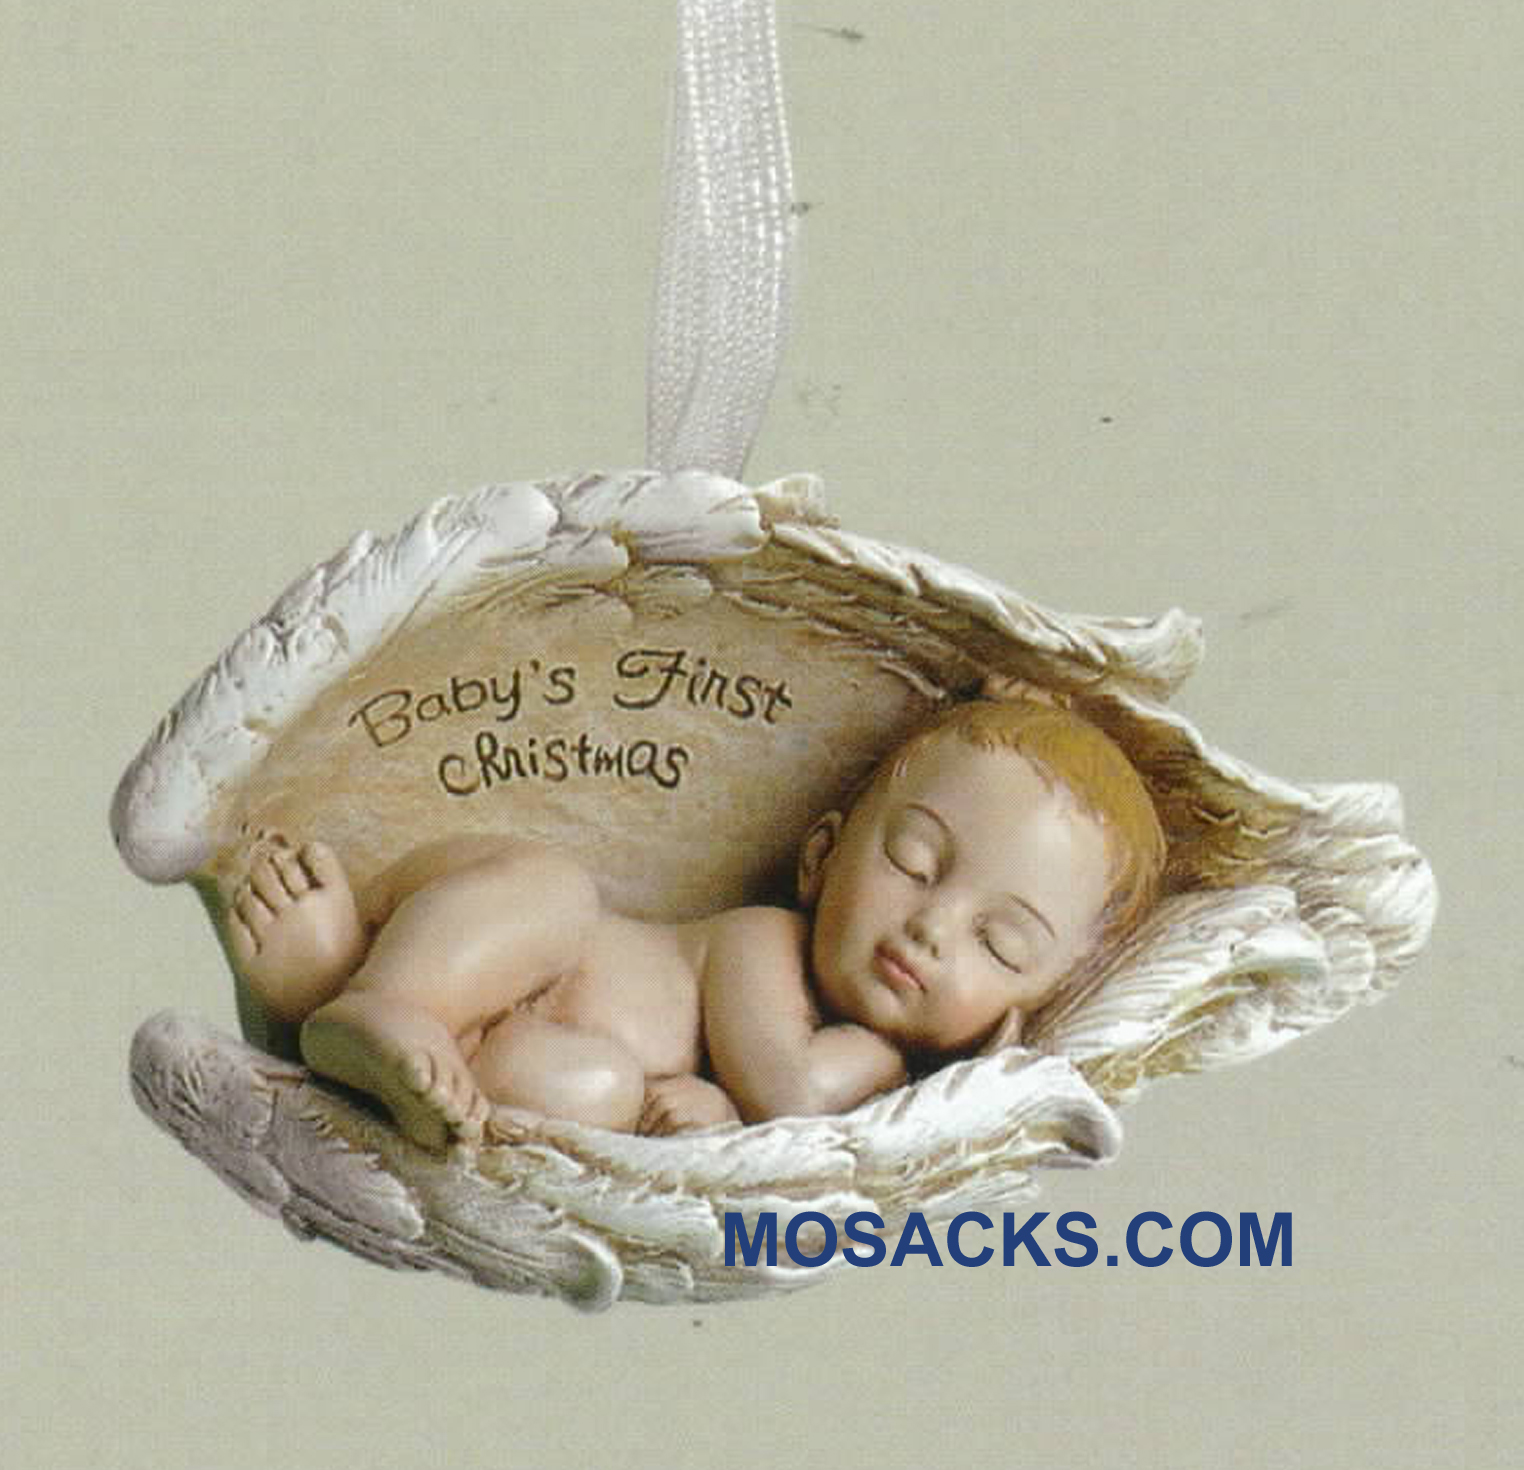 Joseph's Studio Baby Gifts Collection includes the Baby's First Christmas Ornament 20-38267 of the Baby in the Wings of an Angel series